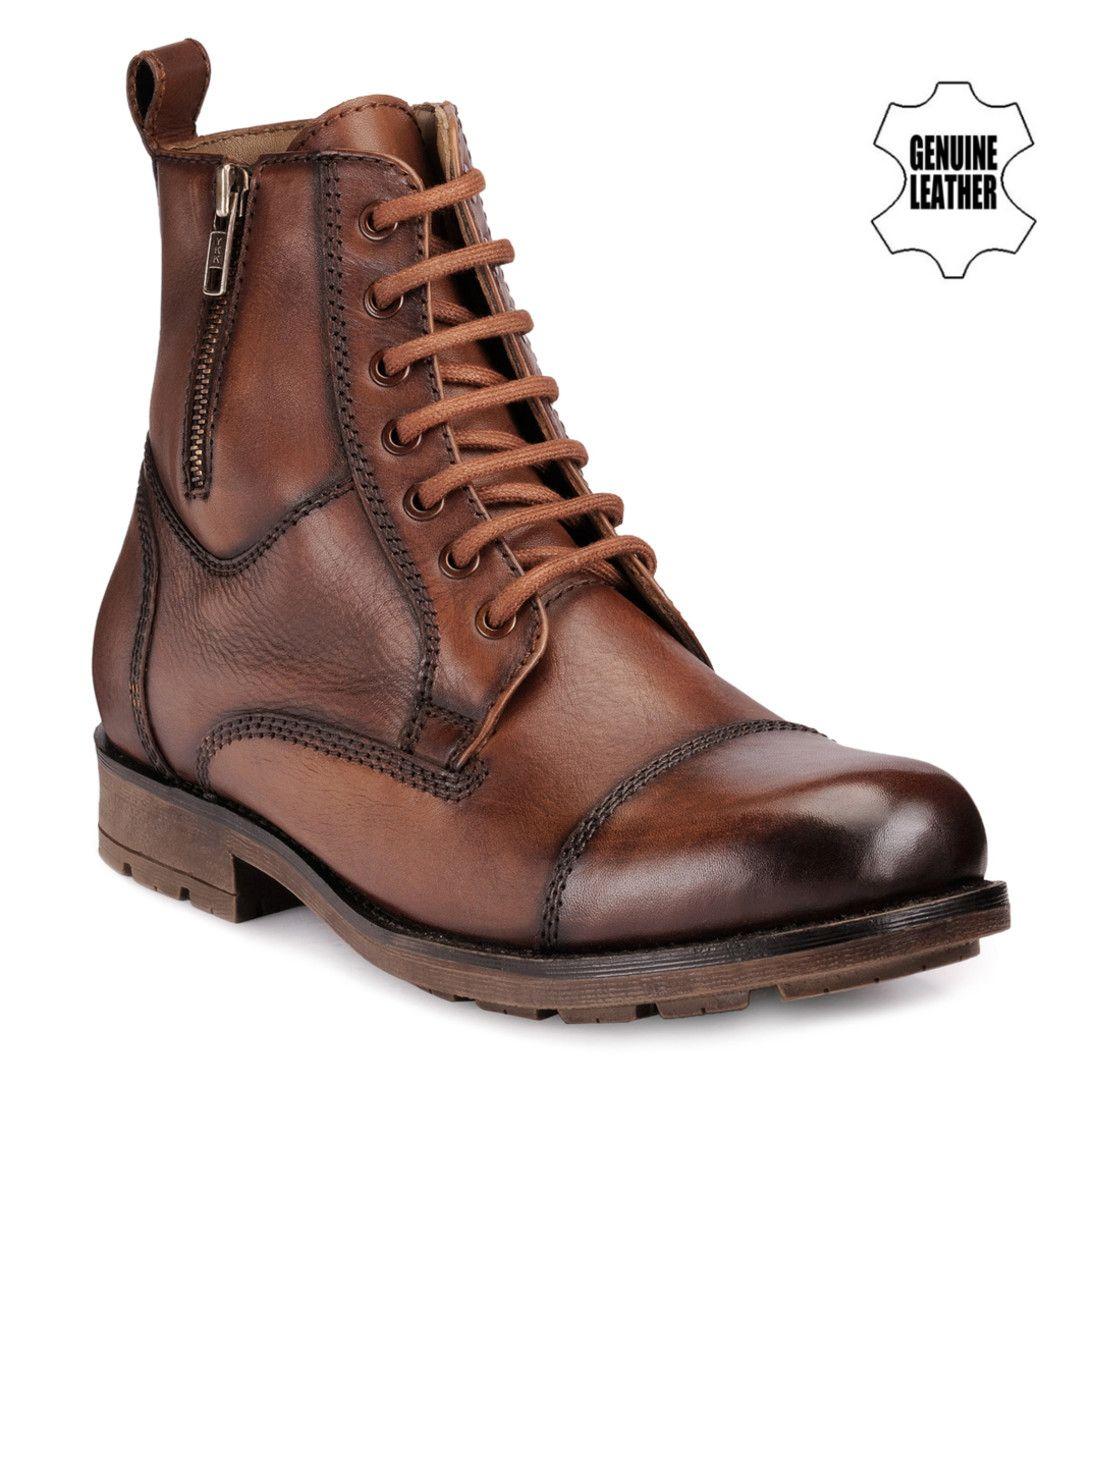 teakwood leathers men brown solid leather high-top boots